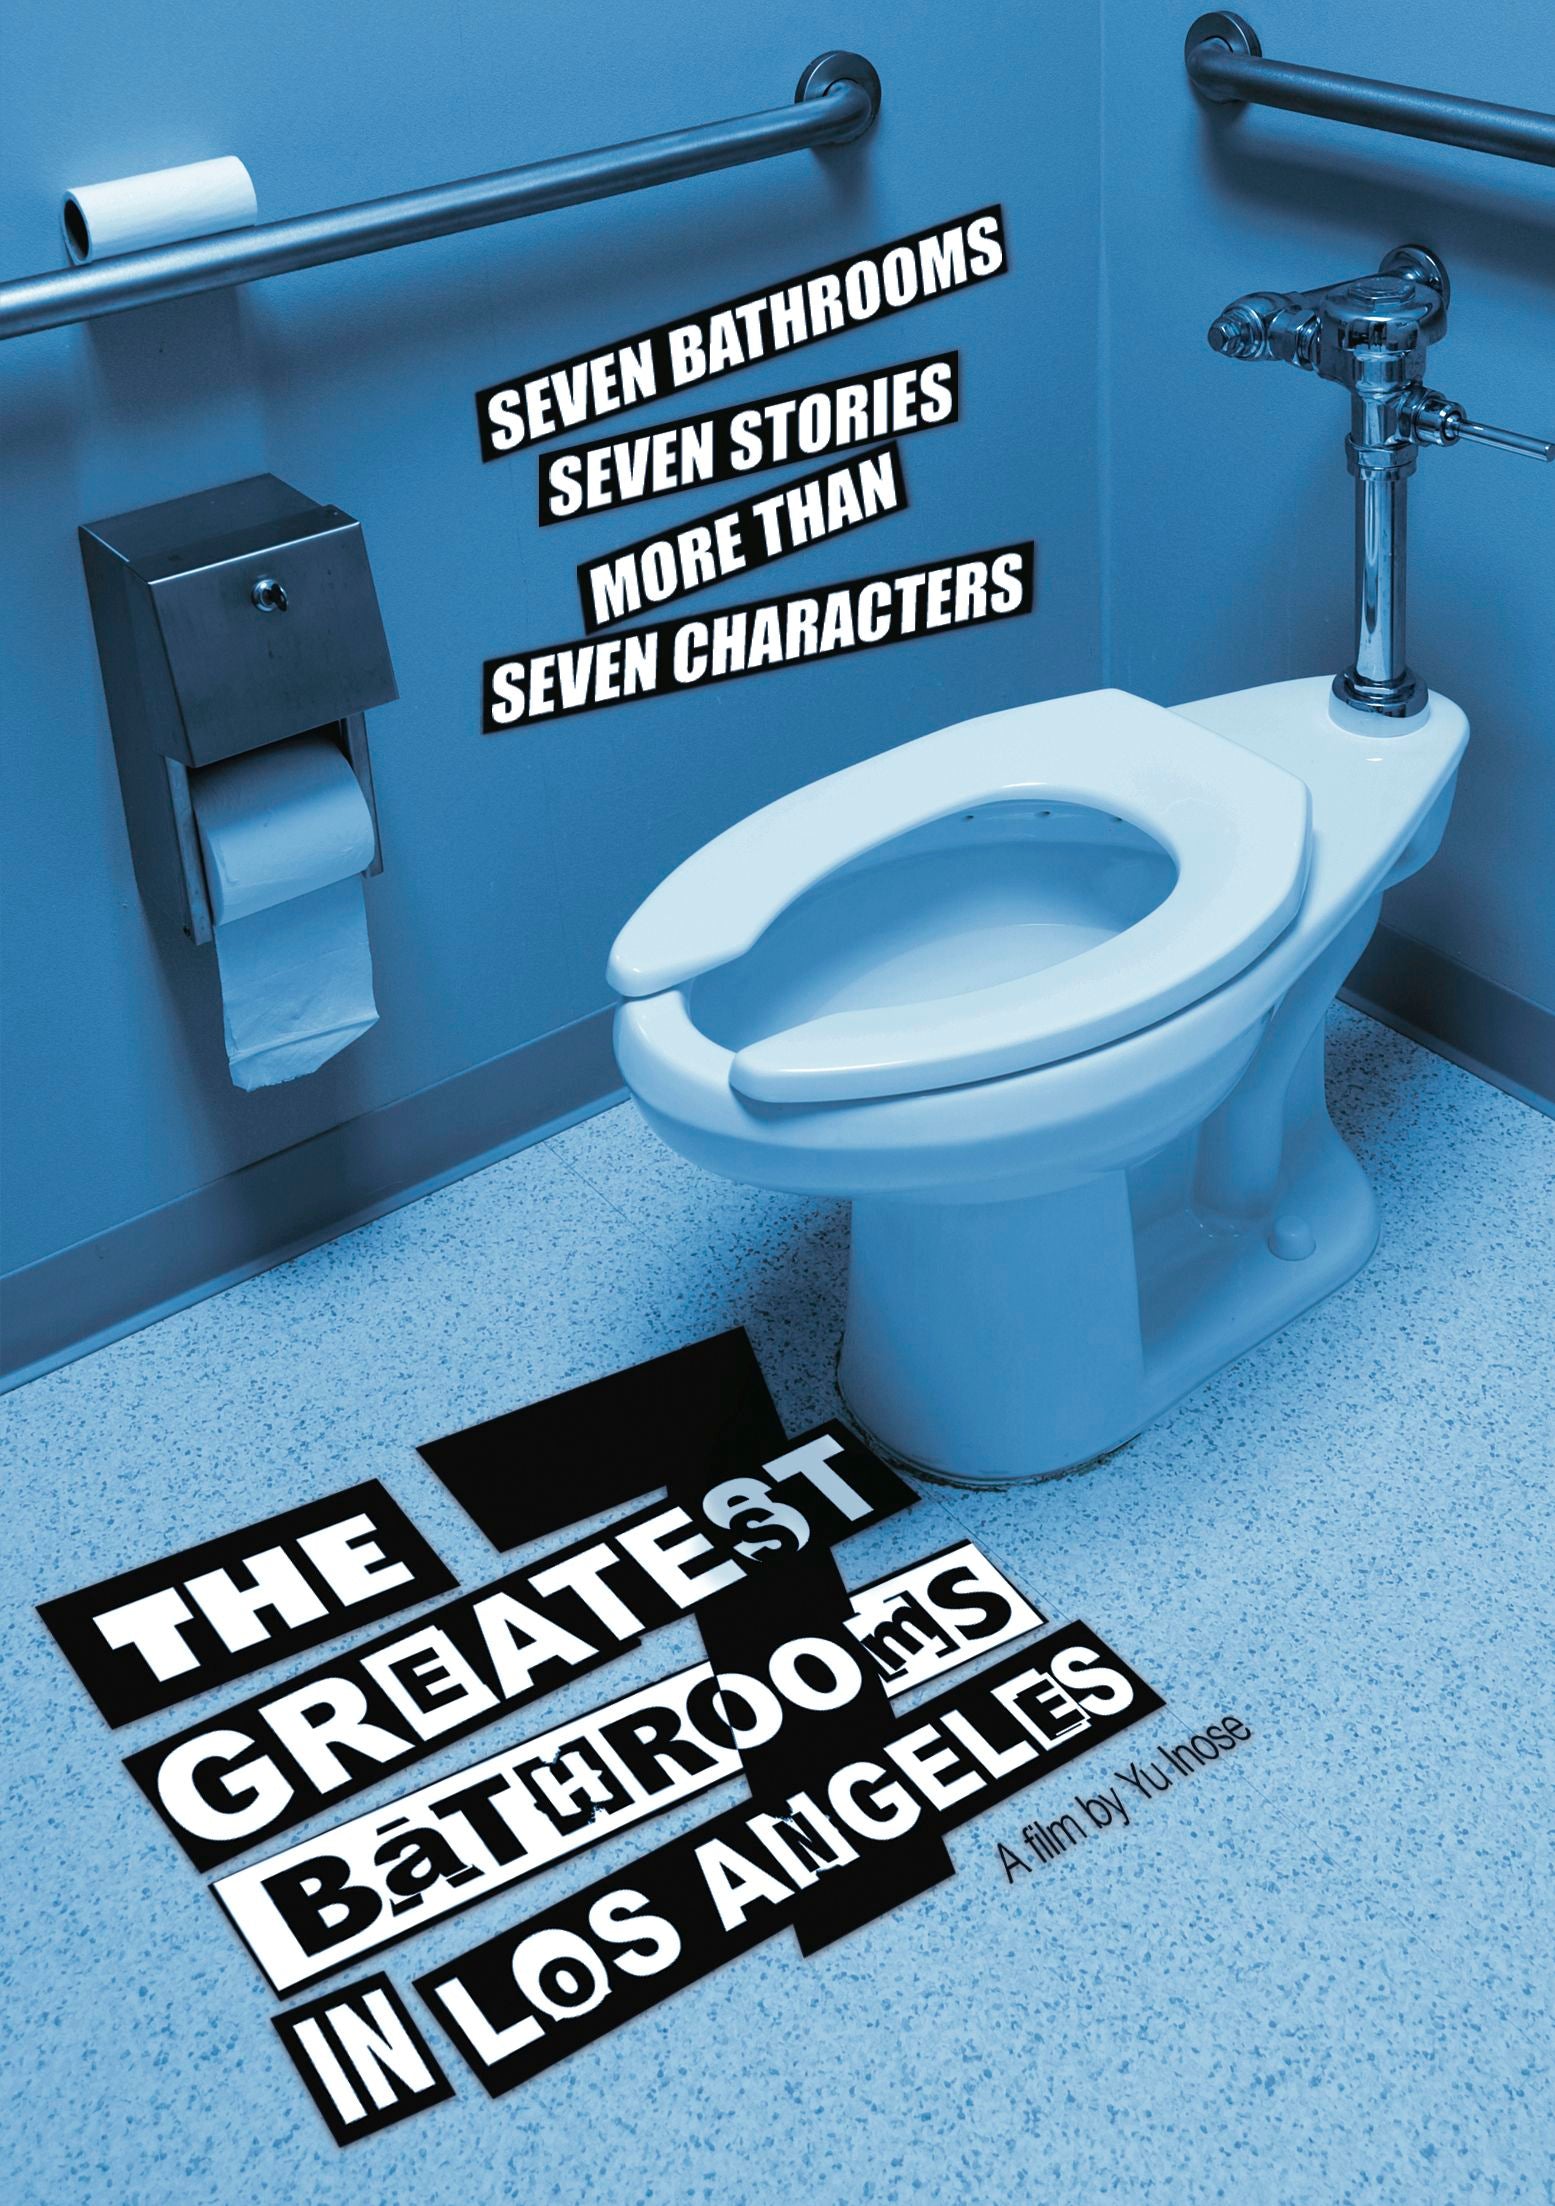 7 Greatest Bathrooms in Los Angeles cover art